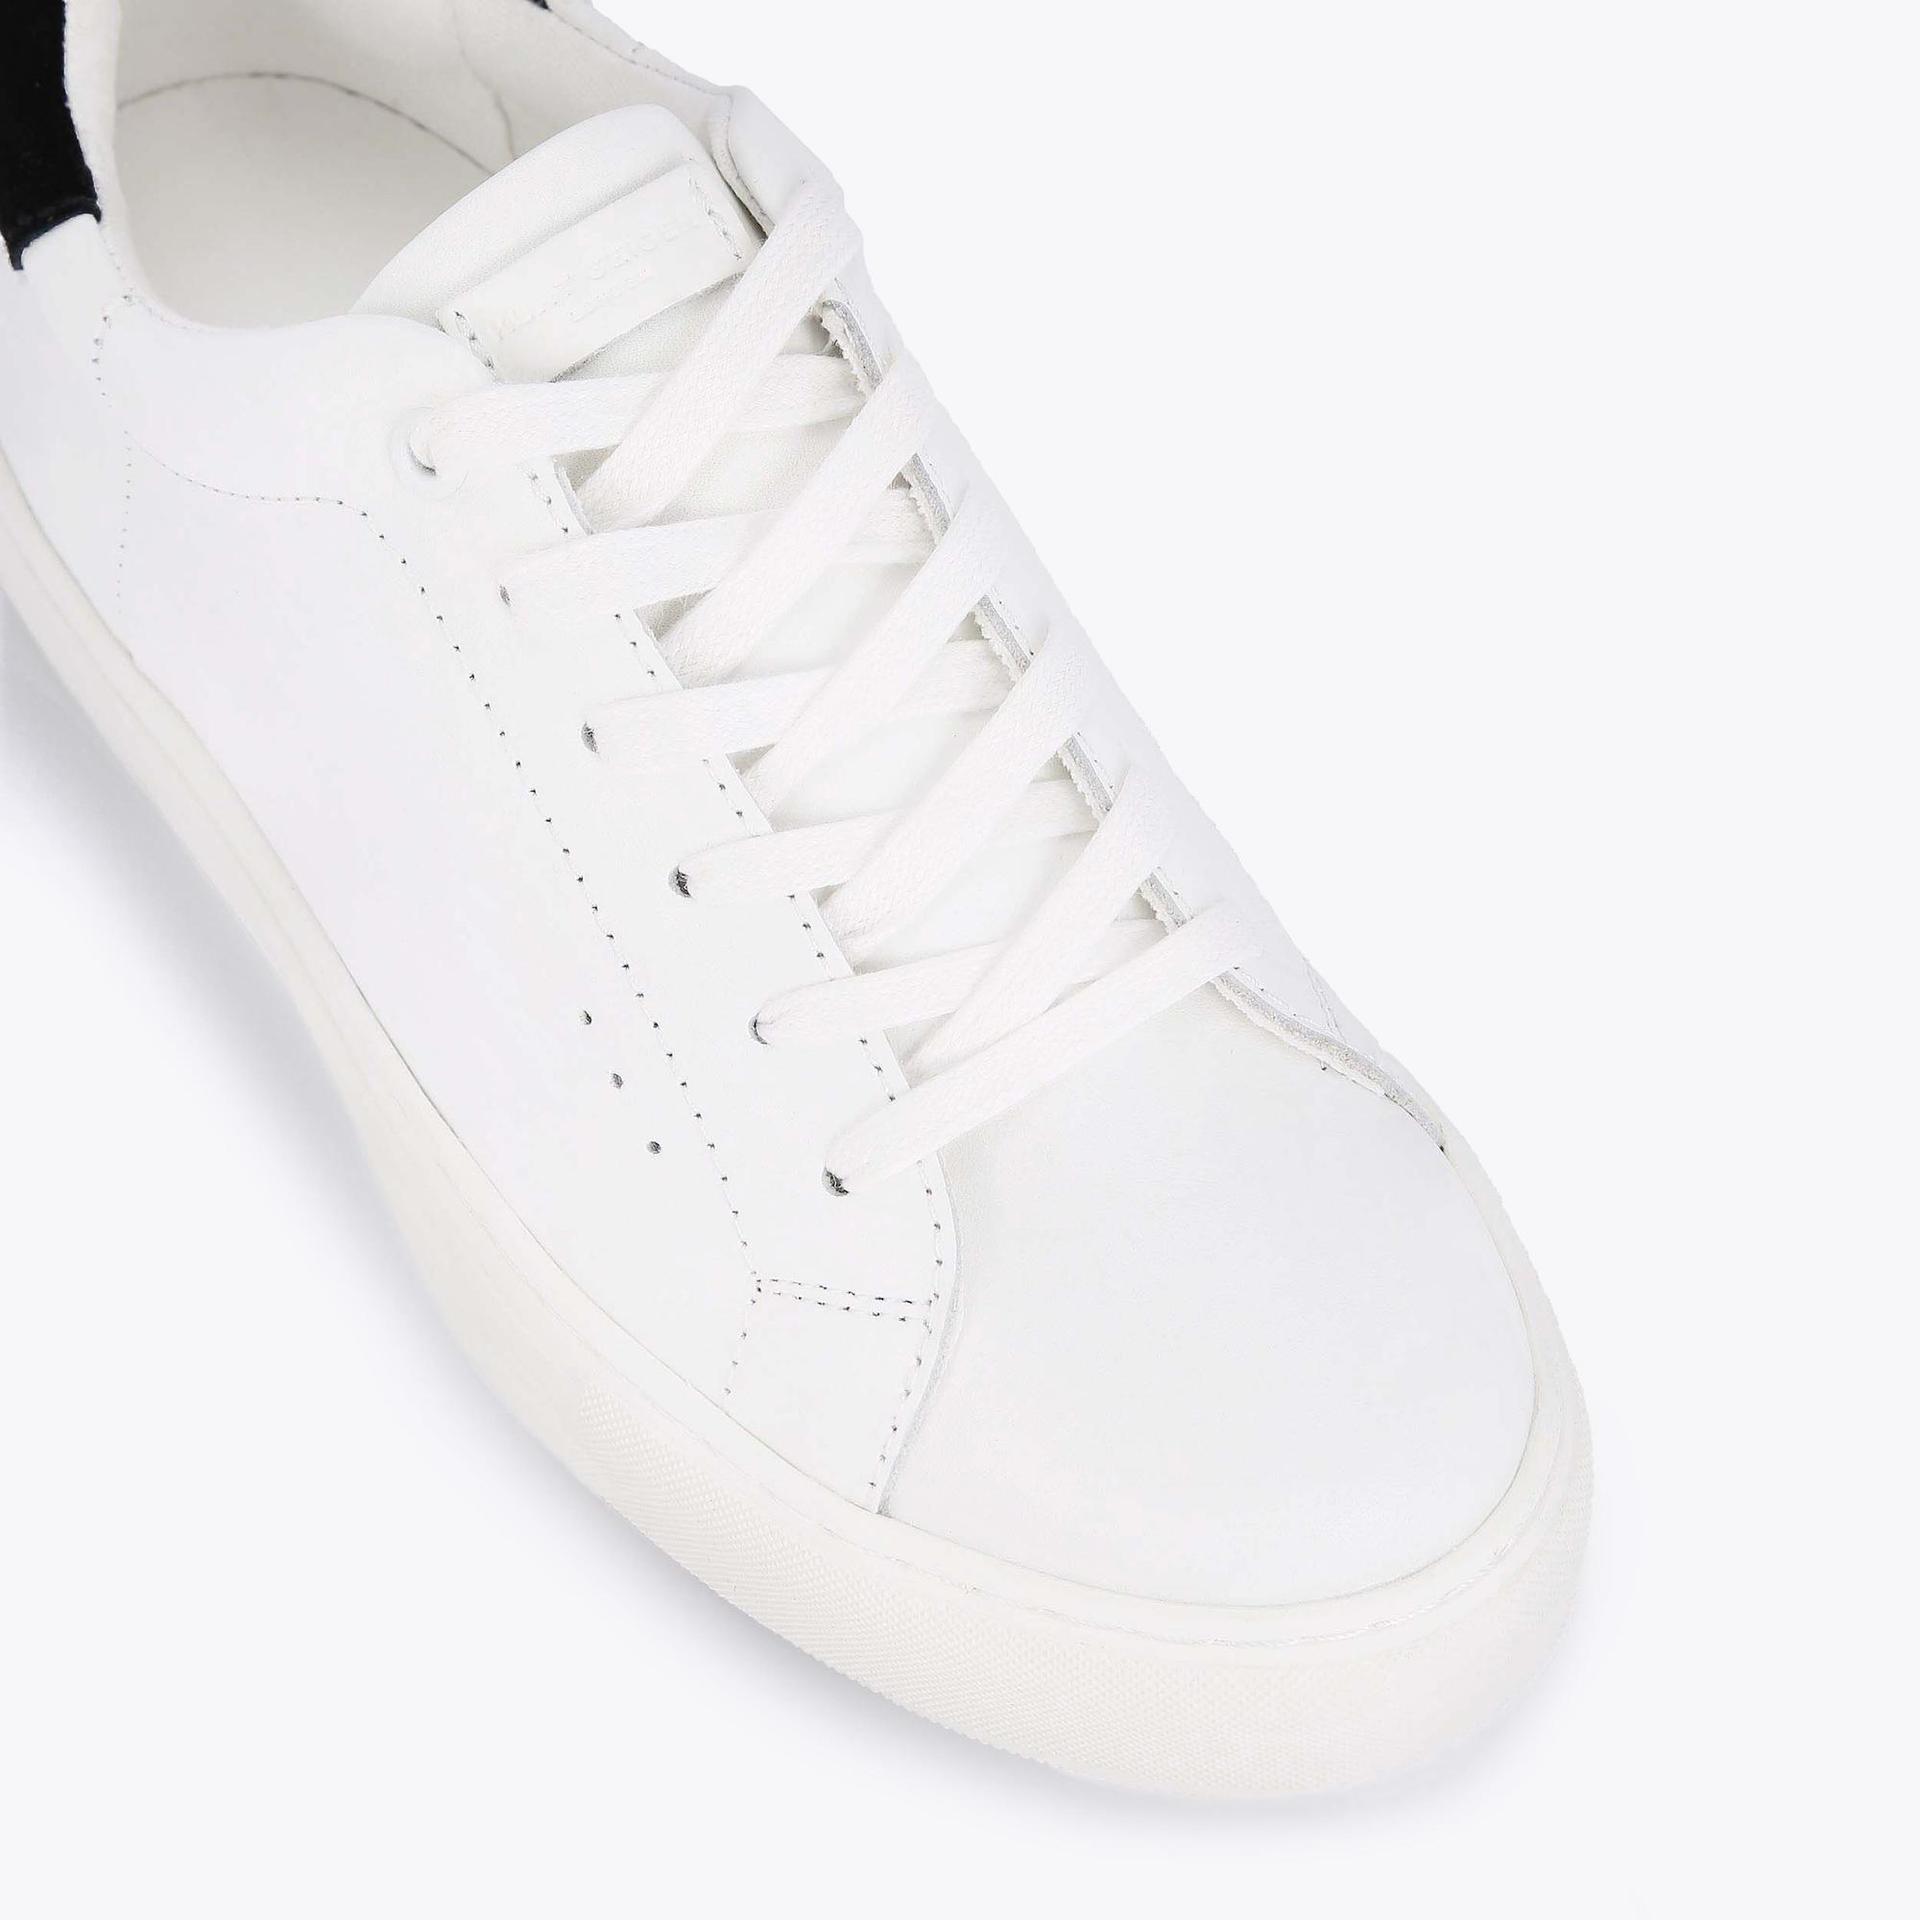 LANEY White Leather Chunky Sneakers by KURT GEIGER LONDON